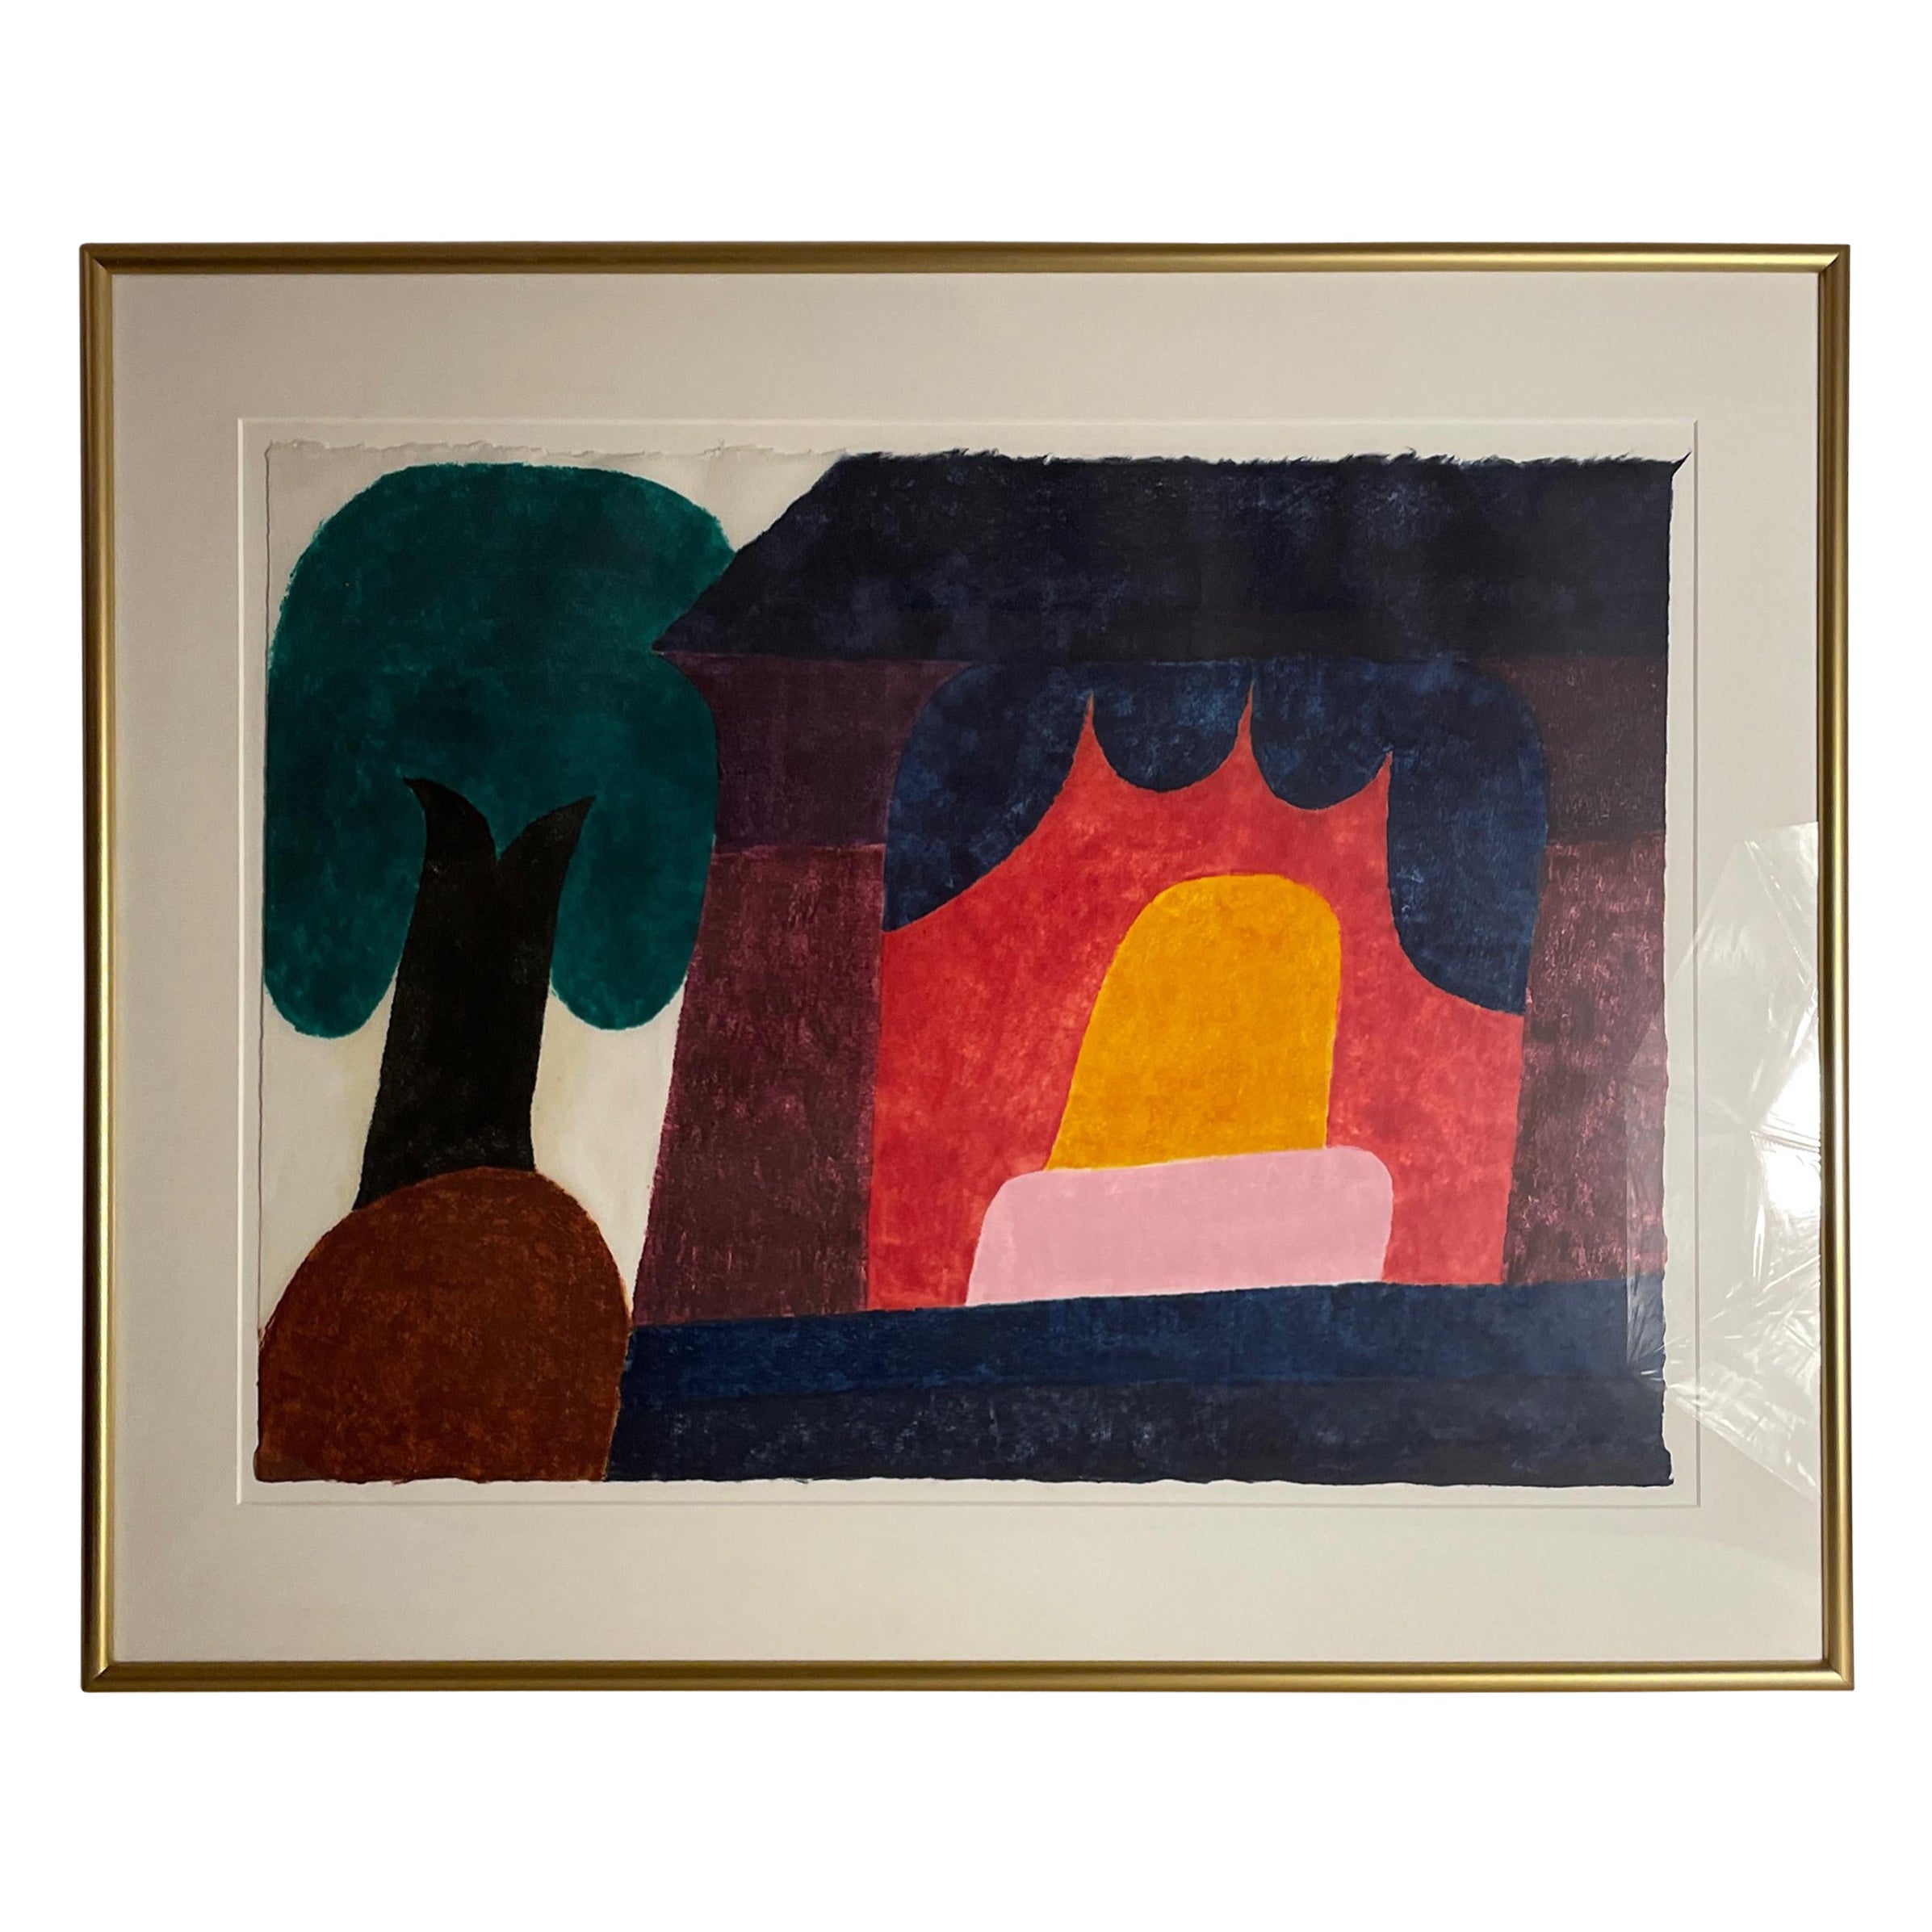 Wood print by Carol Summers titled “Shrines” For Sale